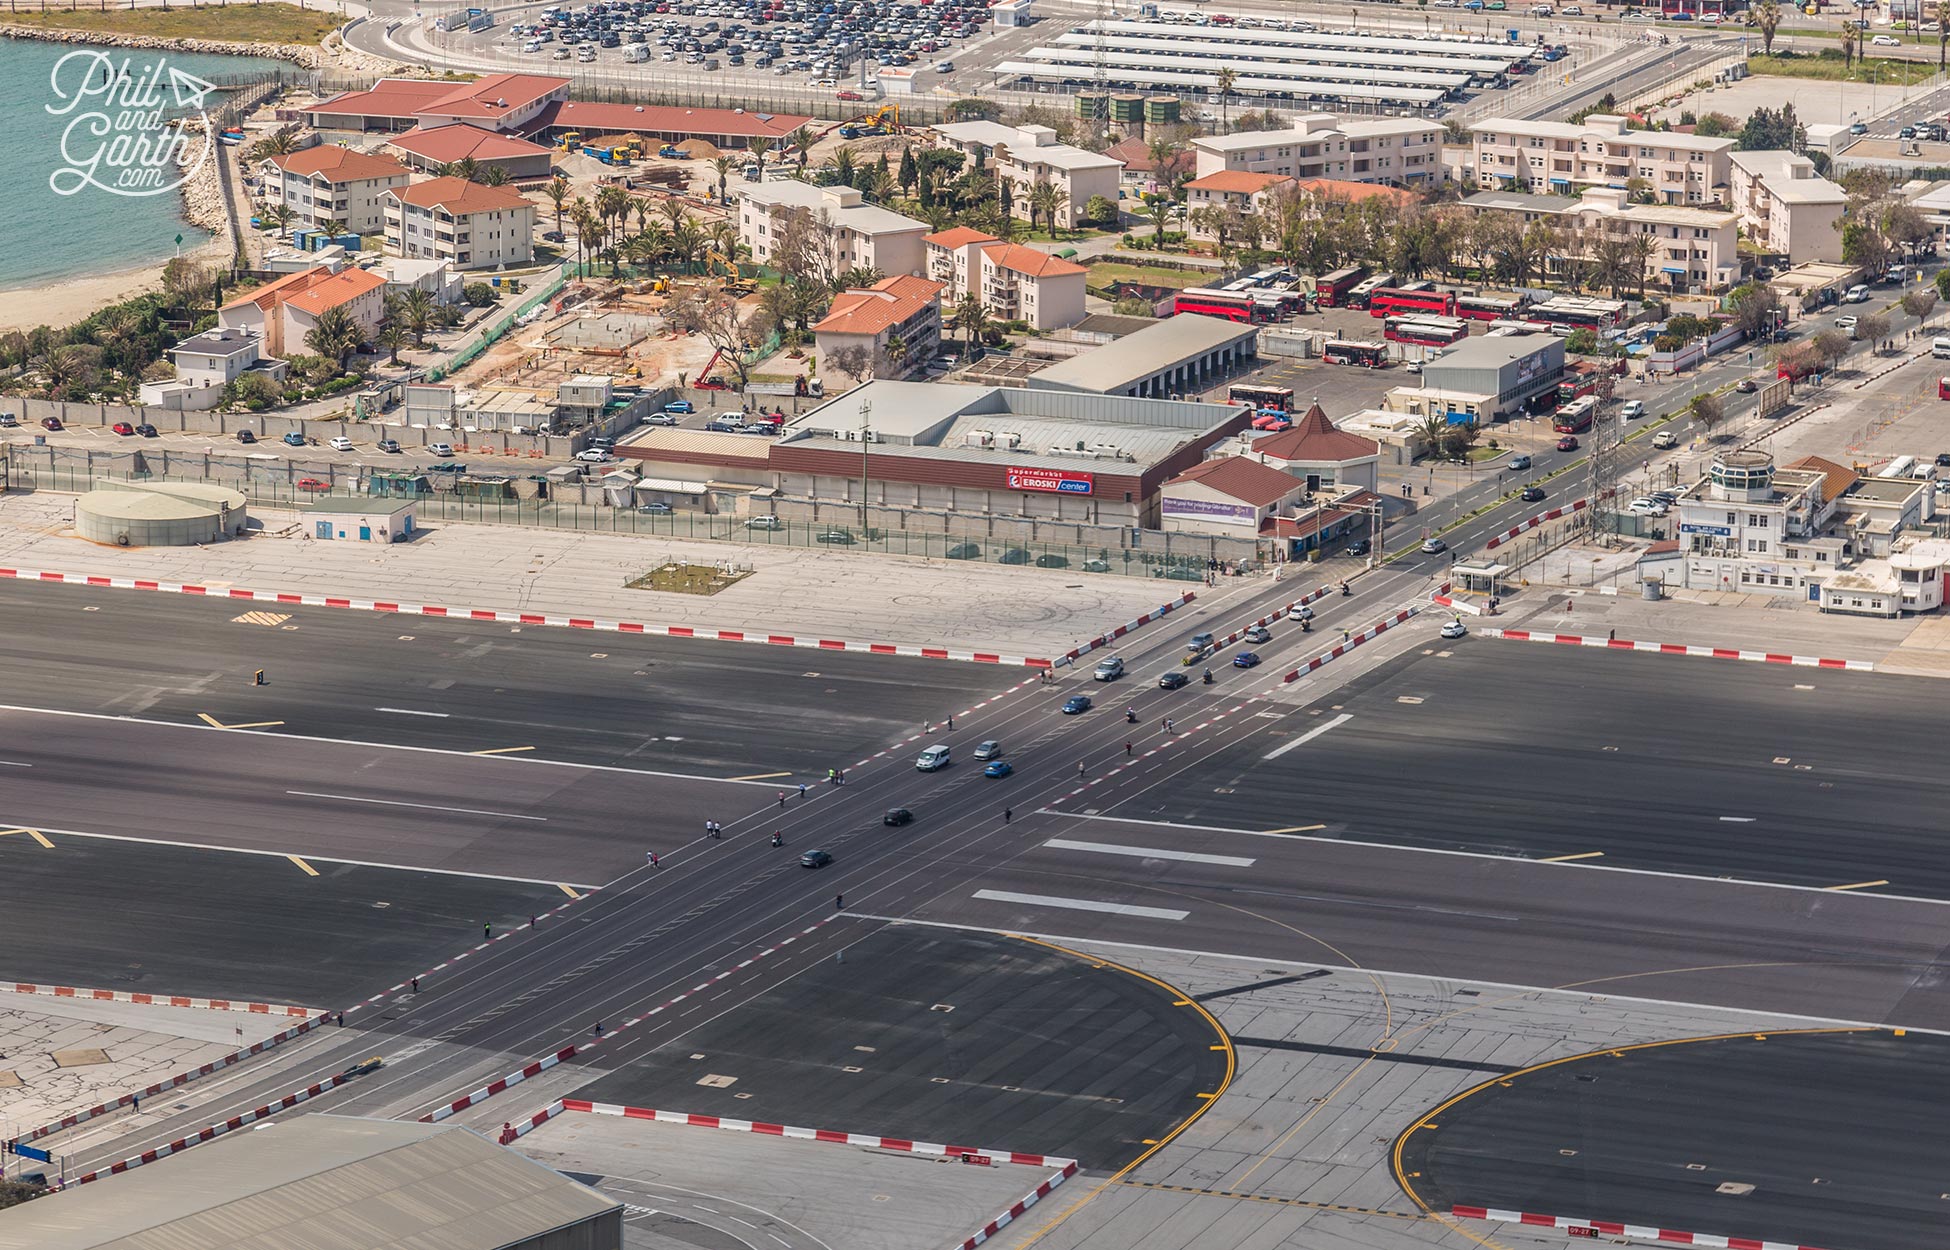 The main road into Gibraltar crosses the runway